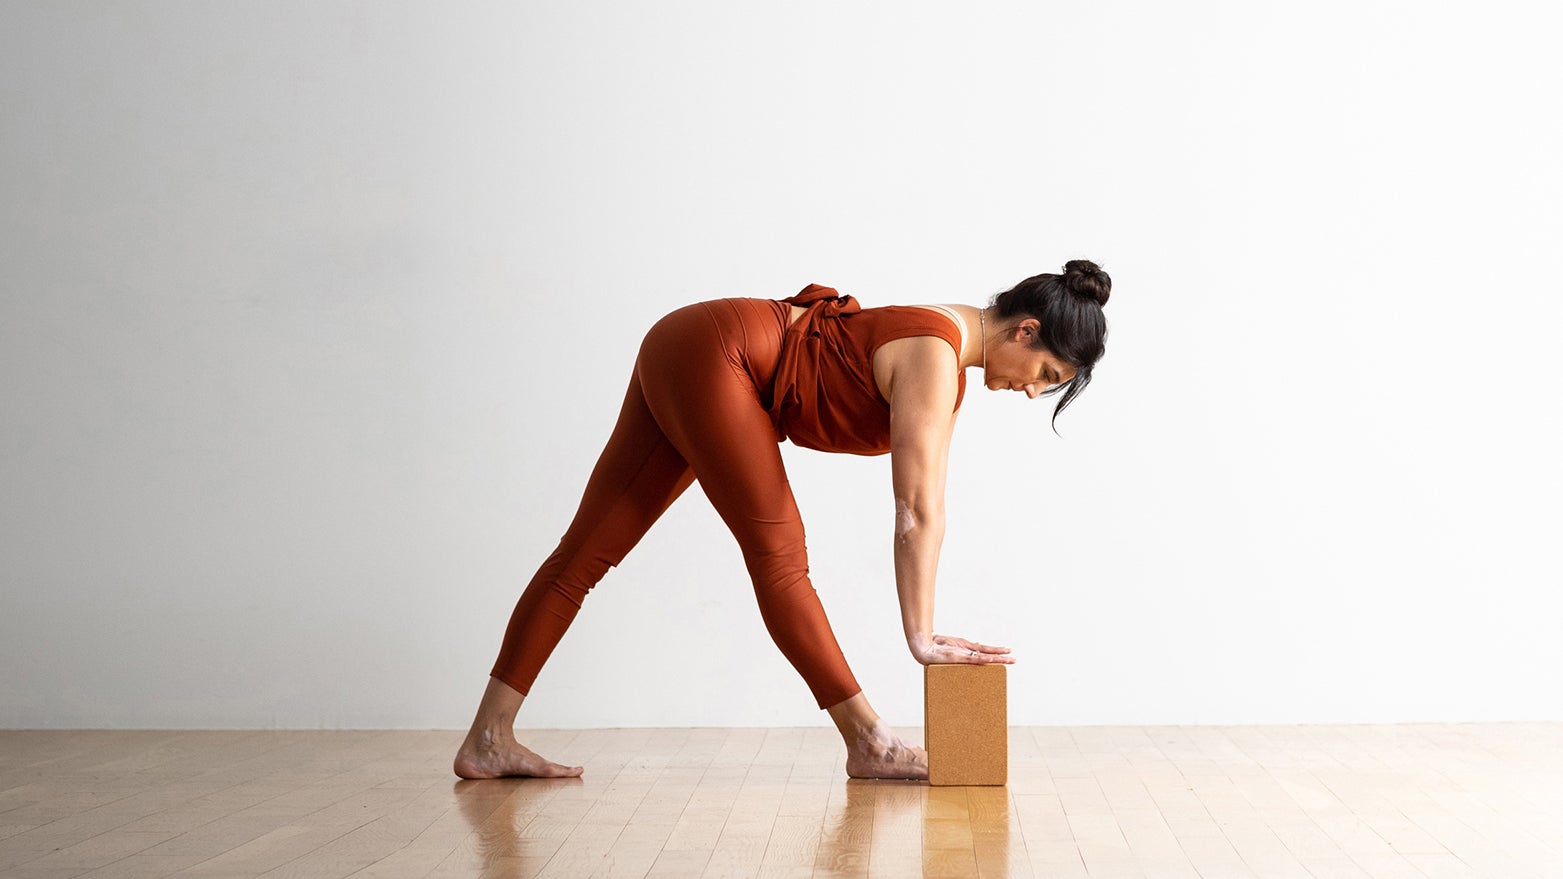 Erin Ong - Yoga & Fitness - These hamstring stretches can be done anytime,  anywhere. I've put together this short hamstring sequence for those who  have tight hamstrings or would like to